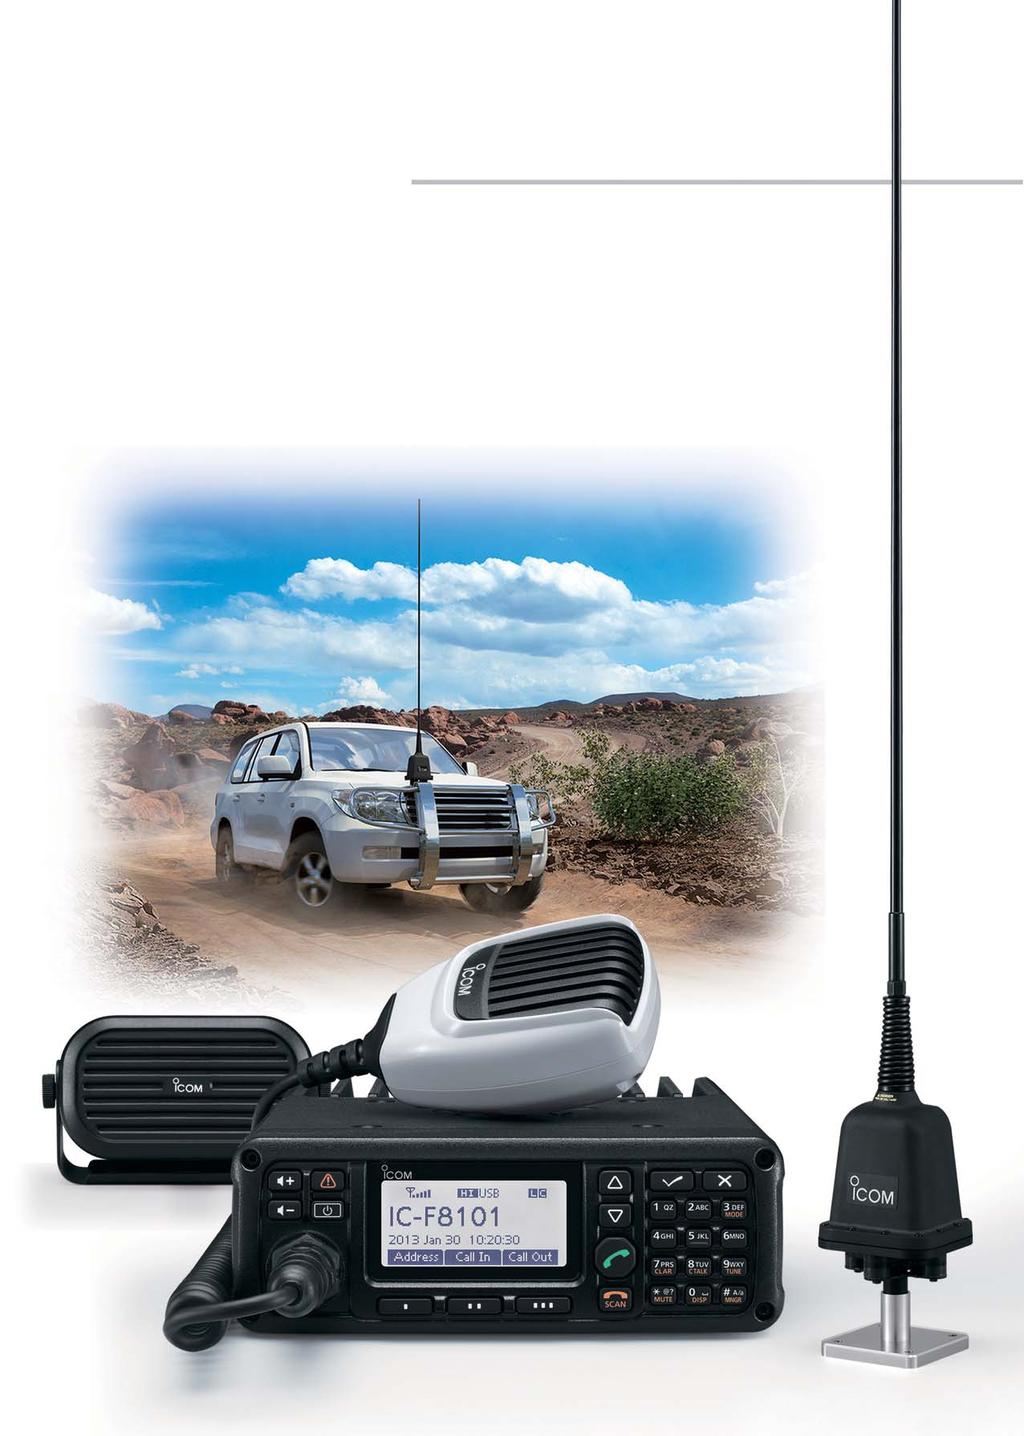 HF TRANSCEIVER Enhanced Version AUTOMATIC TUNING ANTENNAS Wide